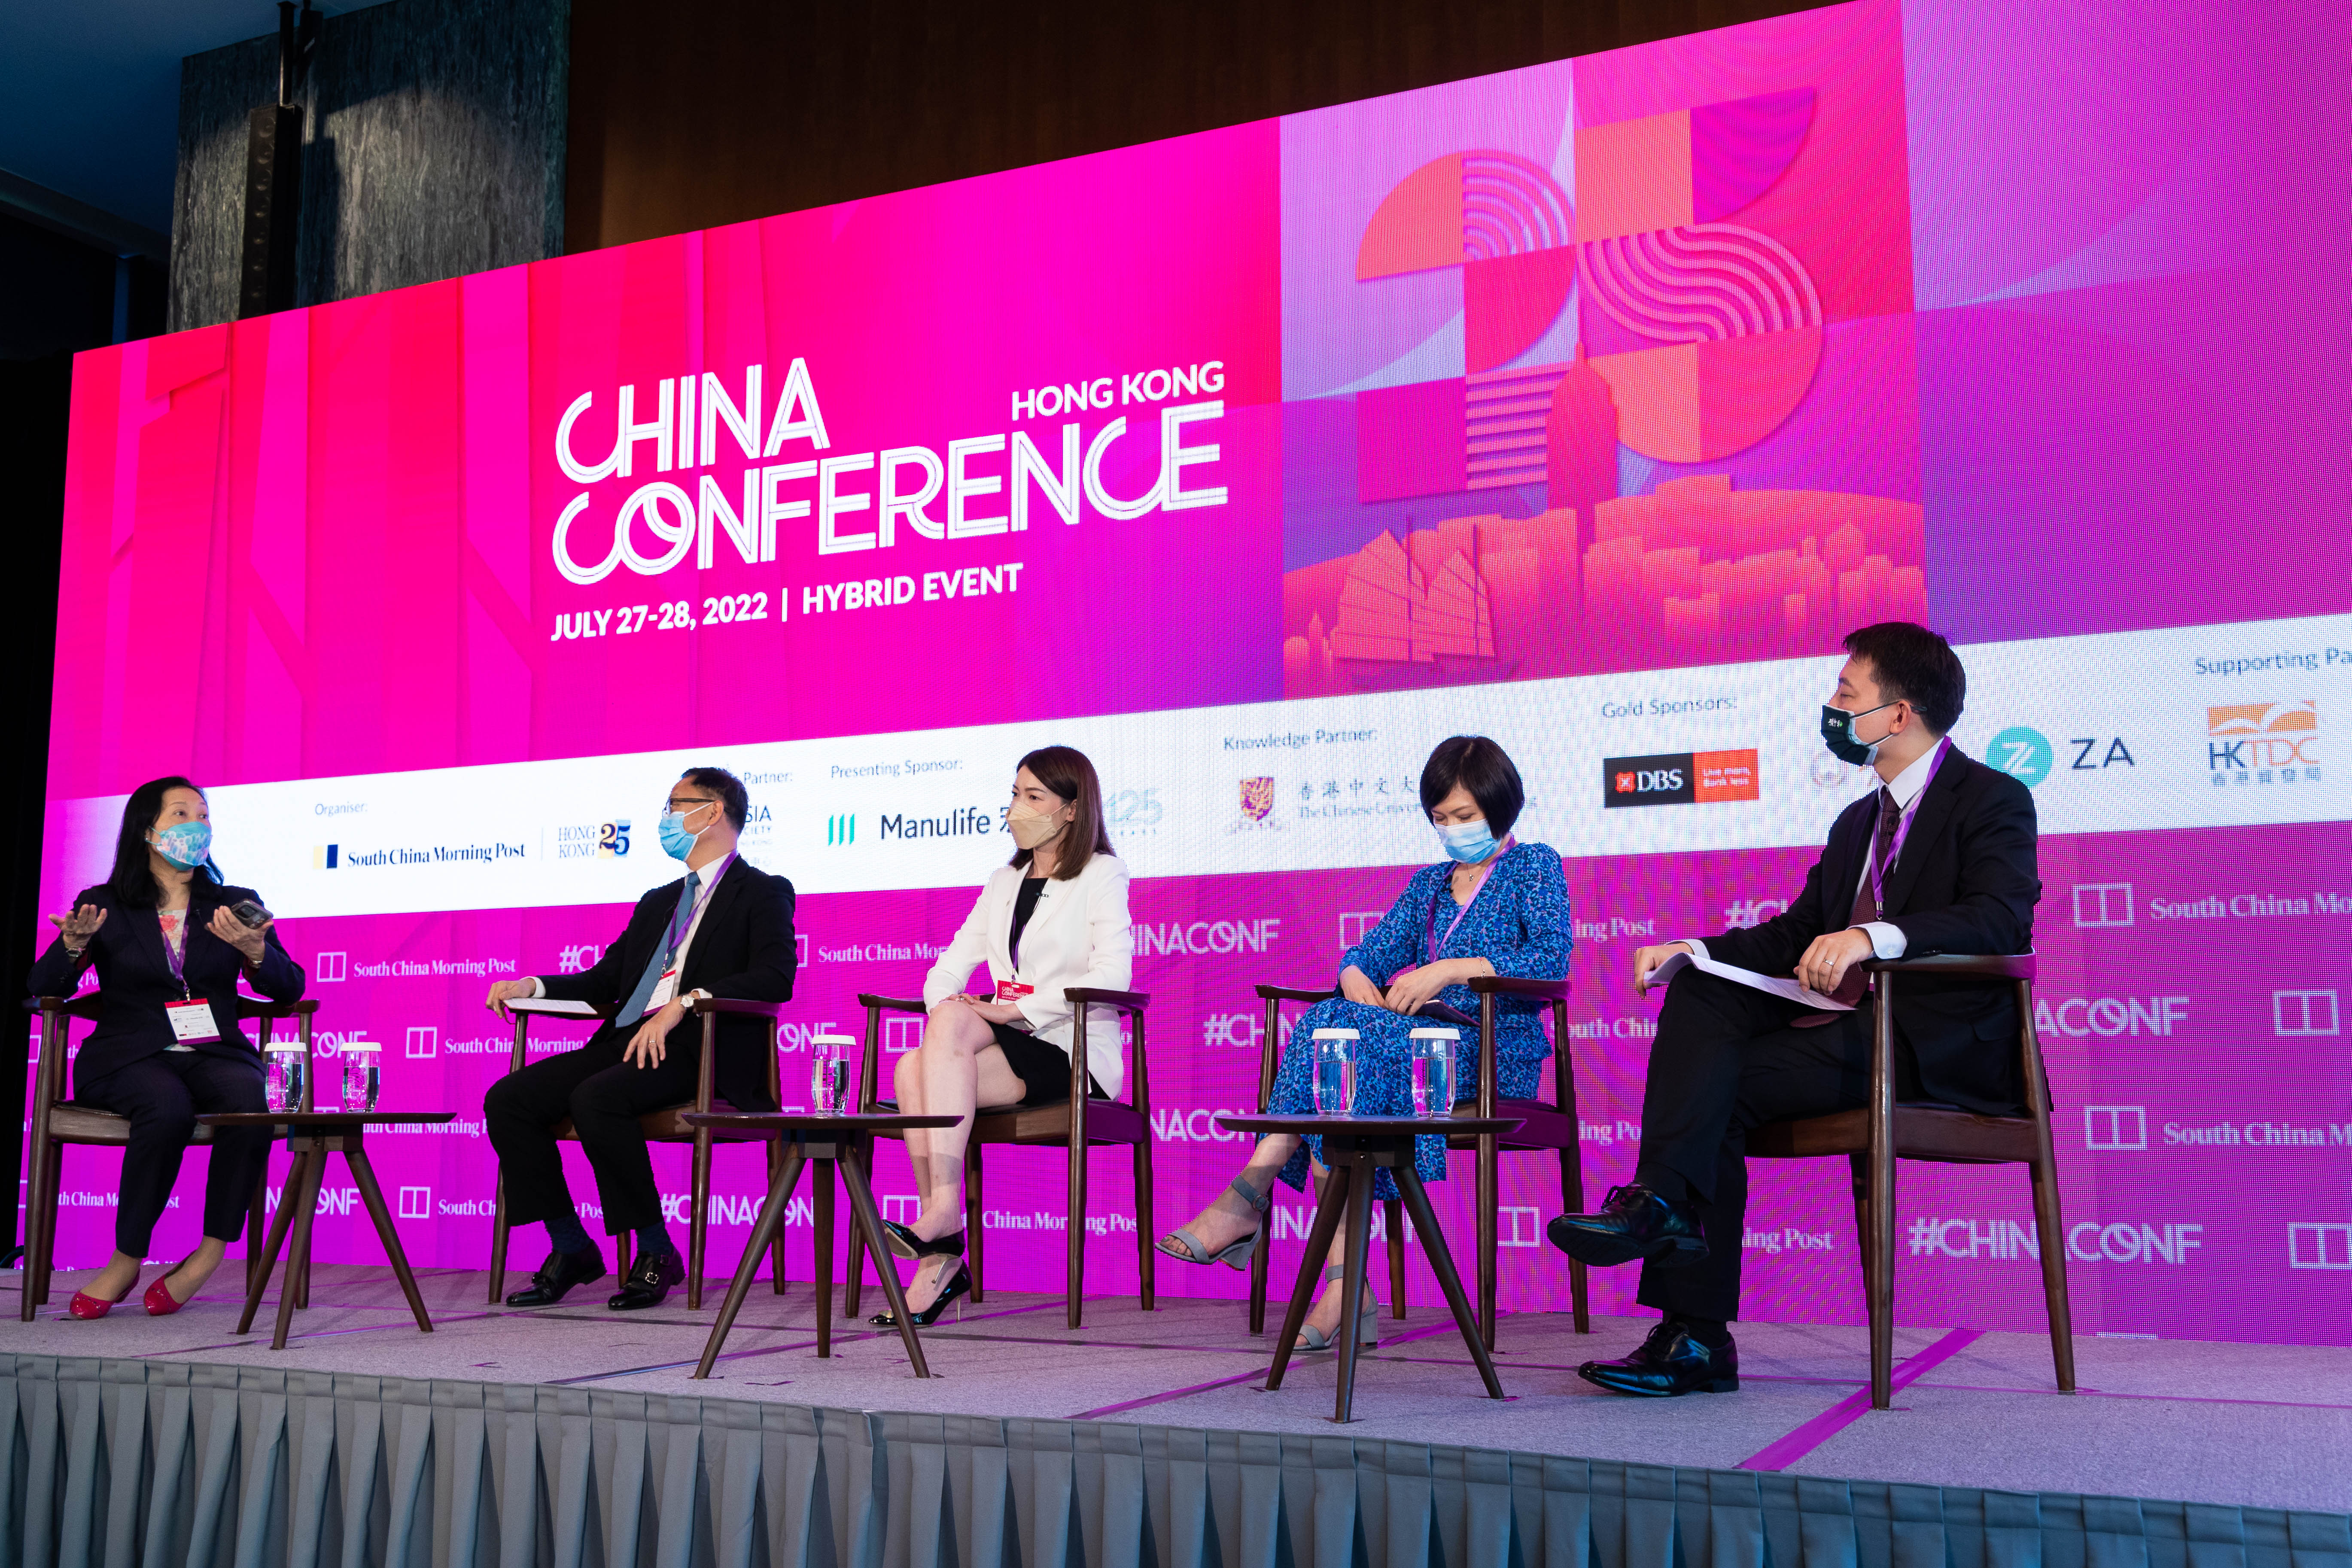 The panel discussion at China Conference: Hong Kong on "How Hong Kong can build itself as the insurance hub for the Greater Bay Area (GBA)"